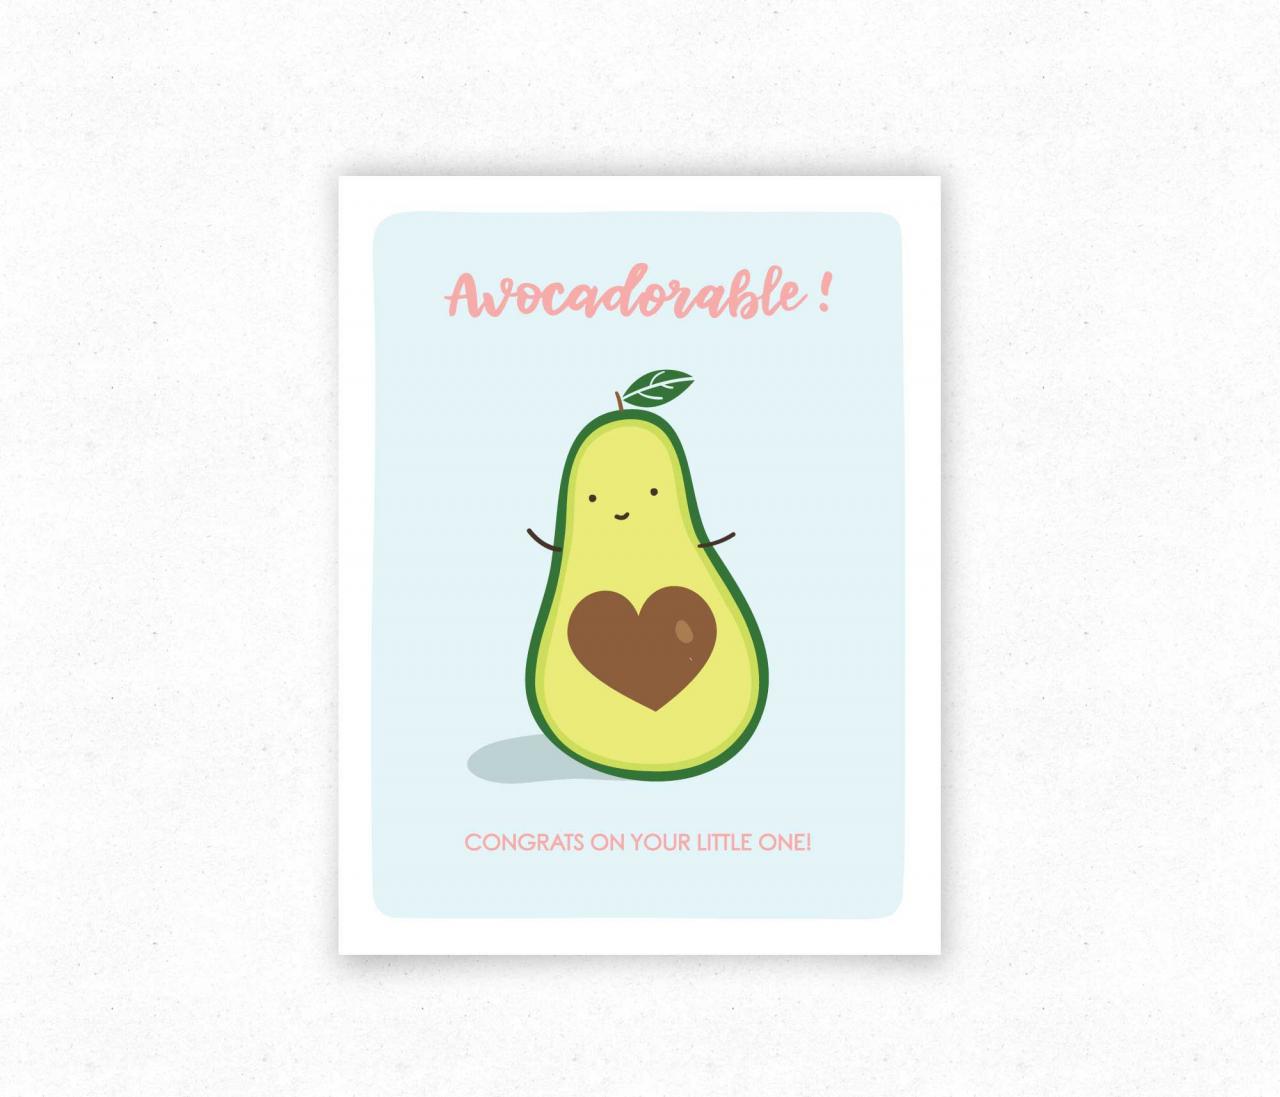 Avocadorable Funny Food Pun Greeting Card, Baby Shower Card, Avocado Illustration.